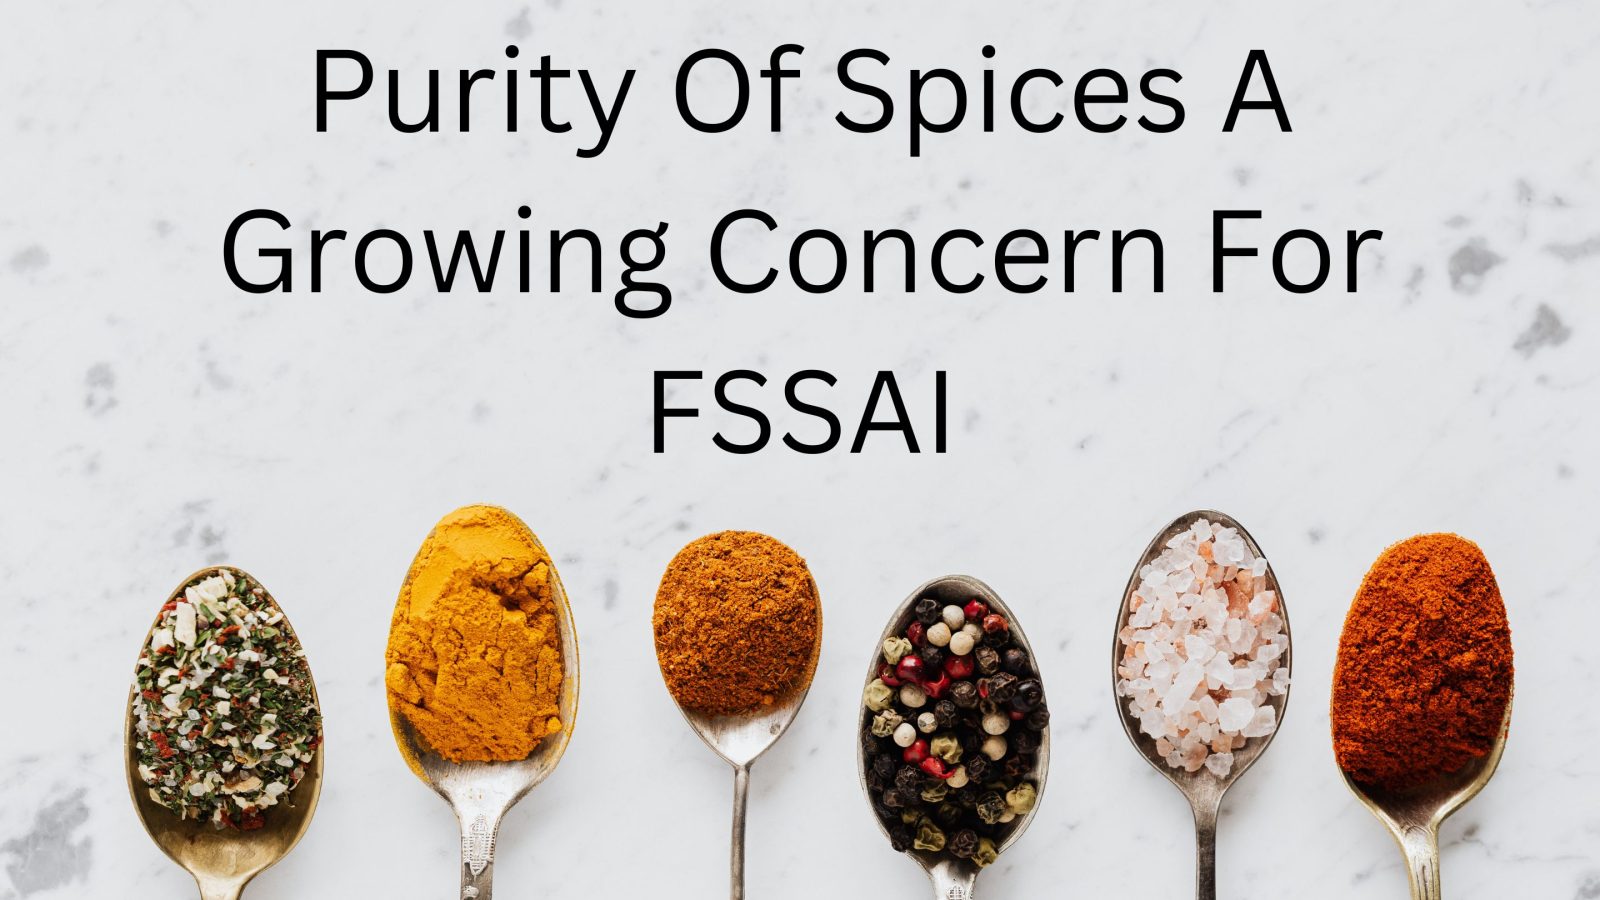 Purity Of Spices A Growing Concern For FSSAI